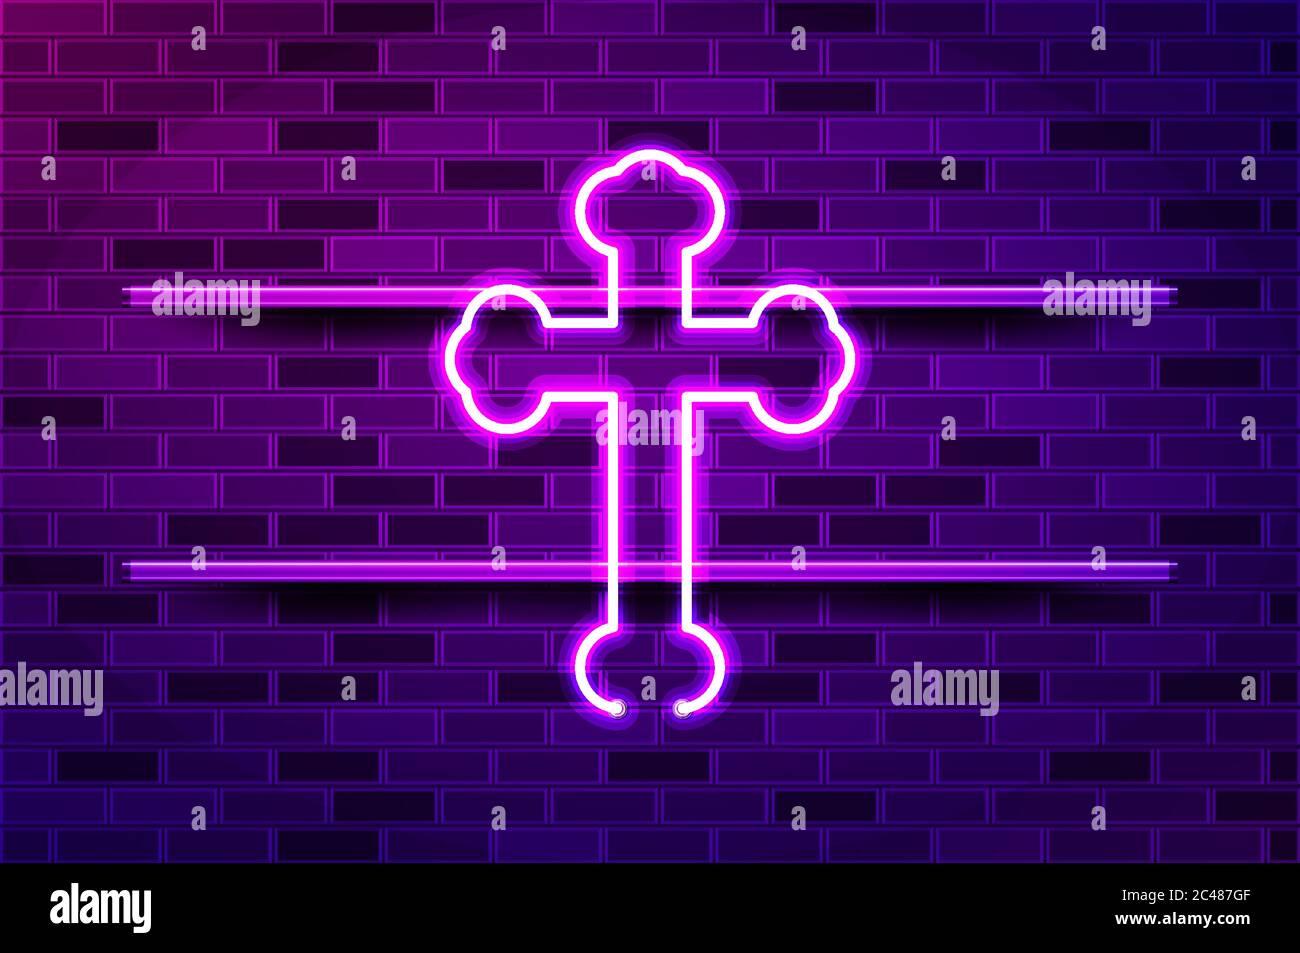 Byzantine cross glowing neon sign or LED strip light. Realistic vector illustration. Purple brick wall, violet glow, metal holders. Stock Vector